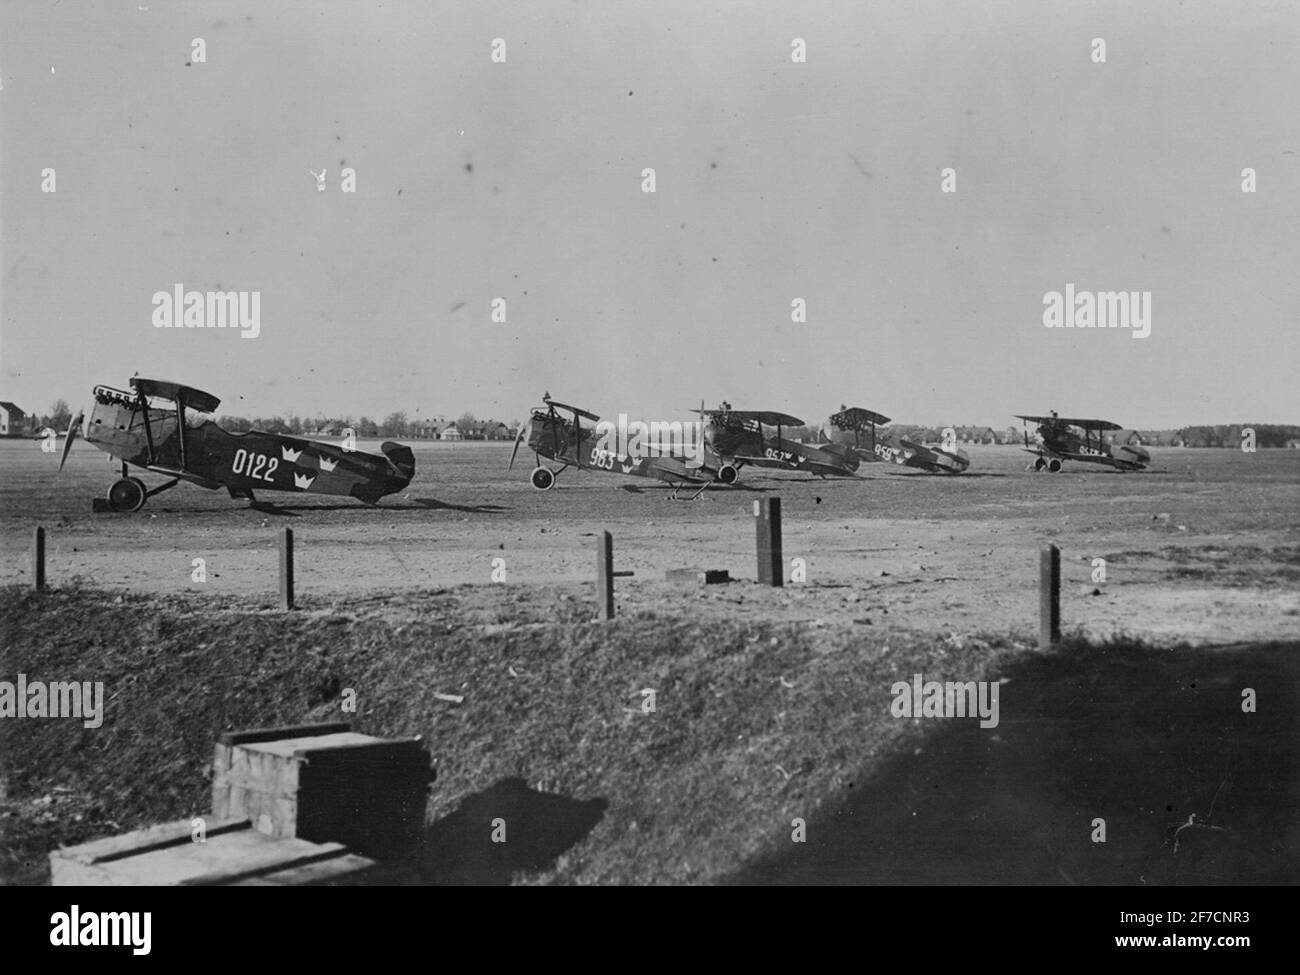 Phönix C.I and four Phönixjagare on an airfield, 1920 . Airplane Phönix C.I marked number 0122 and four aircraft Phönixjagaren marked number 963, 957, 959 and 957 from the aircraft company stands on an airfield. Side view. Stock Photo